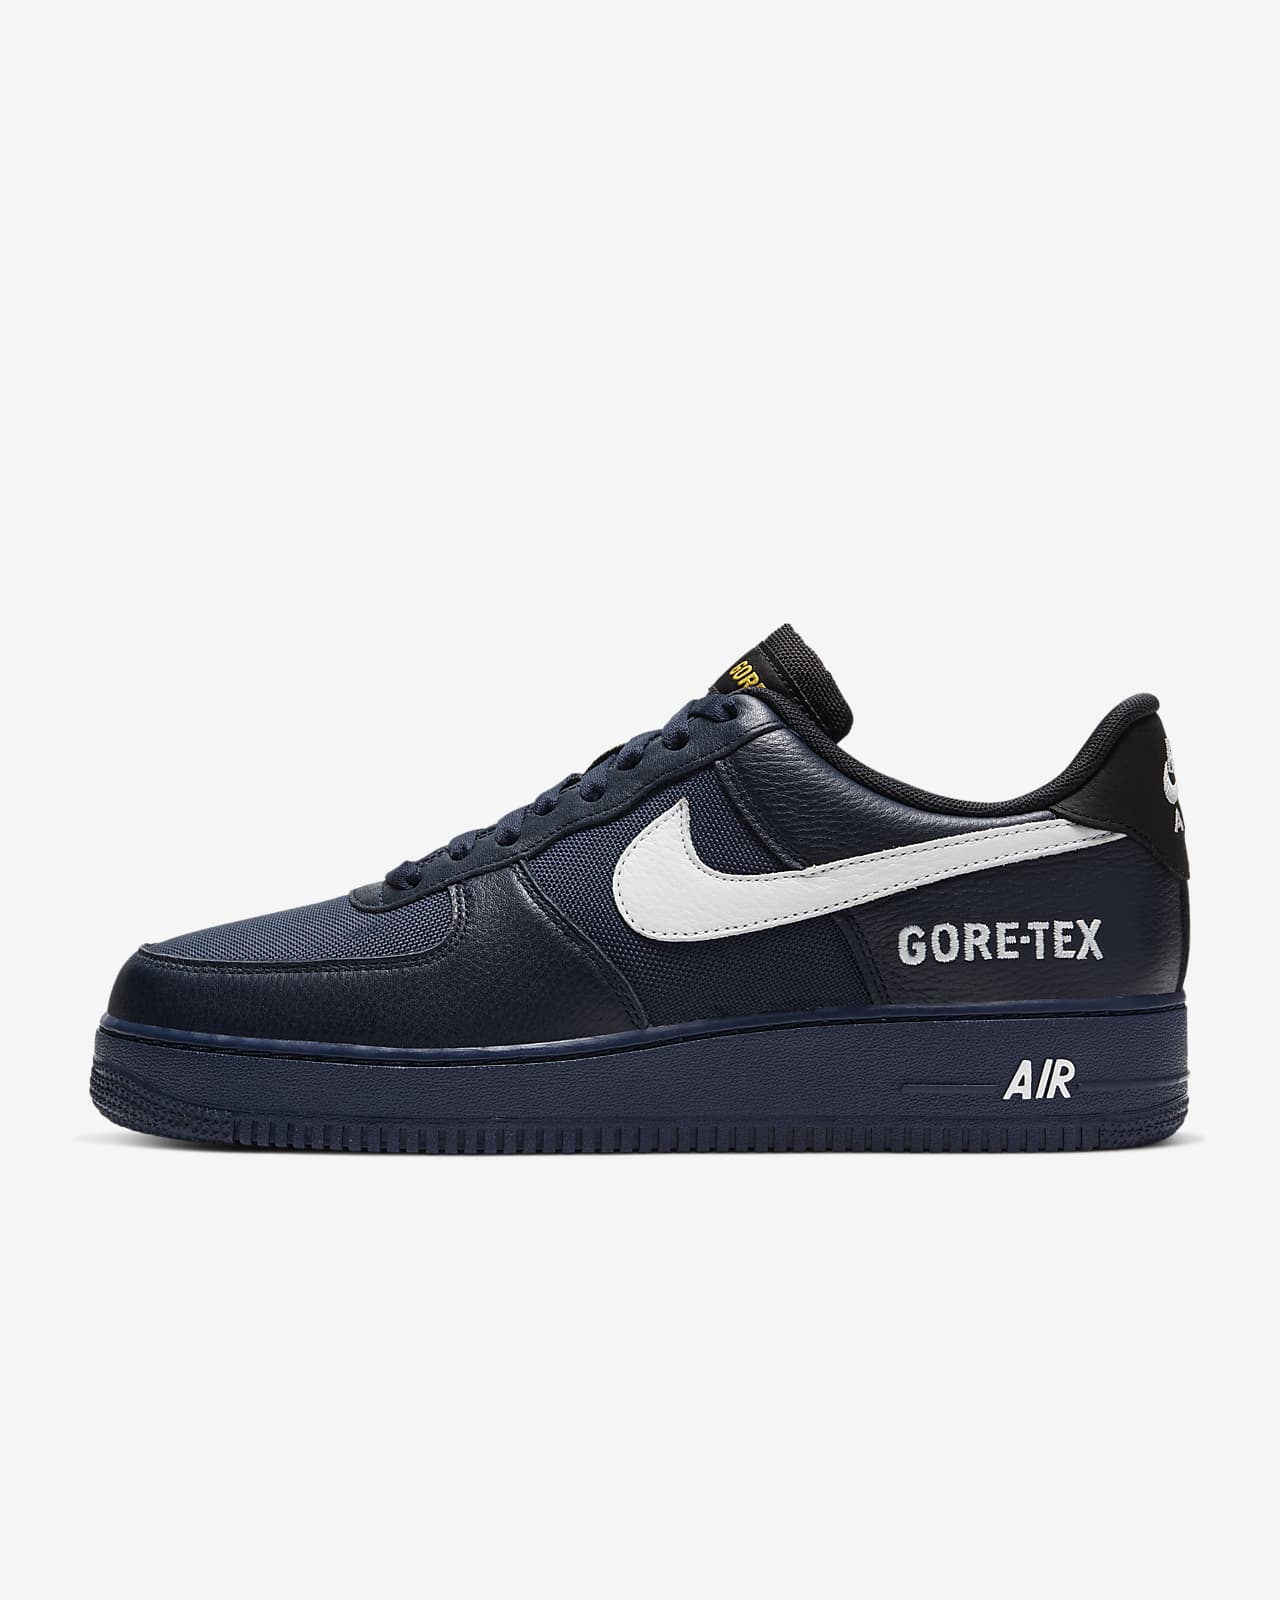 nike air force one outlet